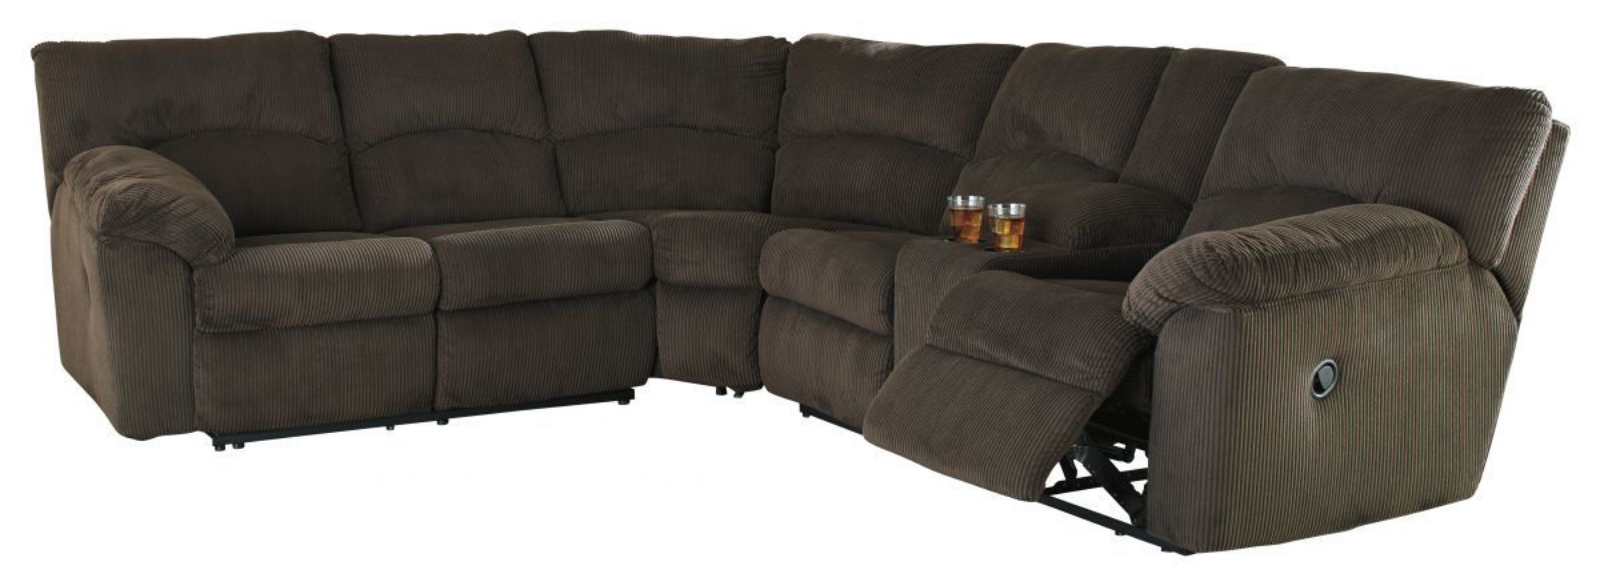 Picture of Hopkinton Sectional